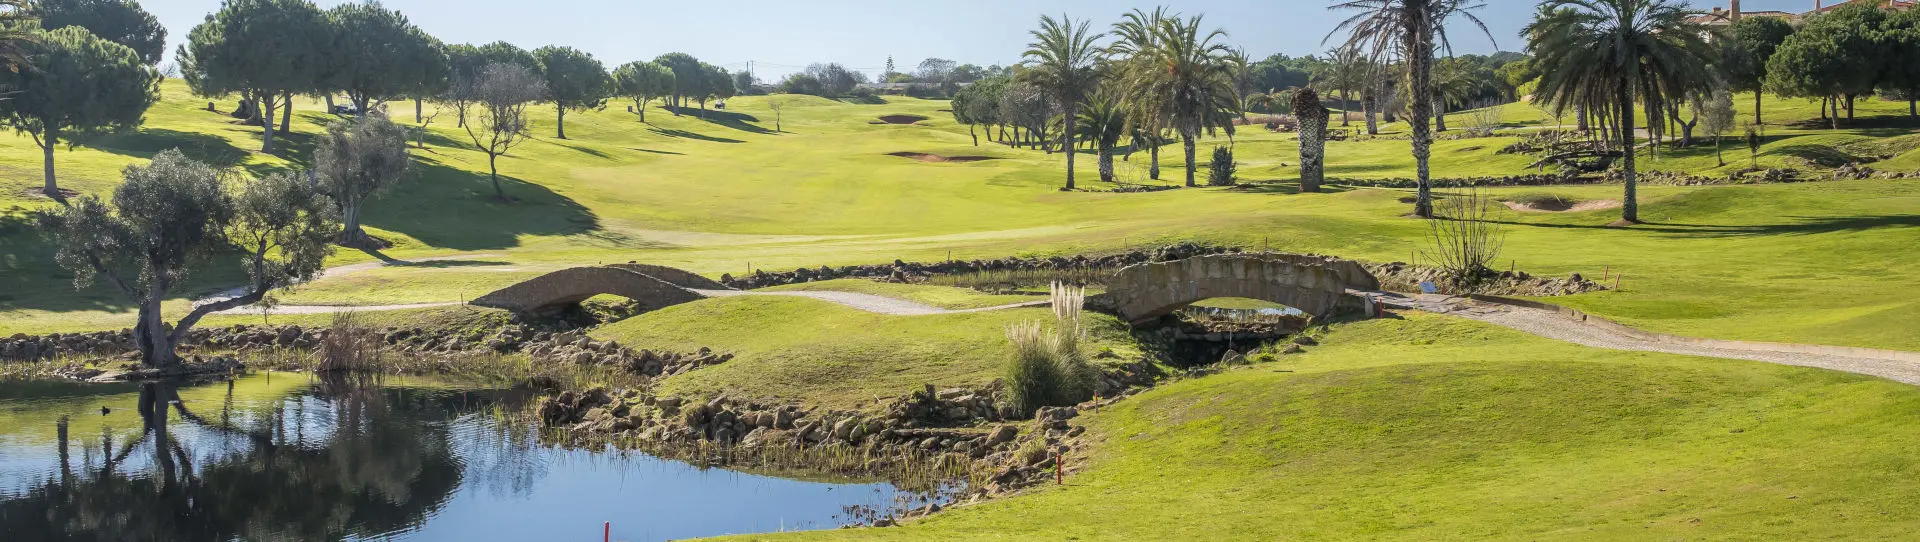 Portugal golf holidays - 7 Nights SC & Unlimited Golf Rounds<br>Groups of 4 - Photo 3